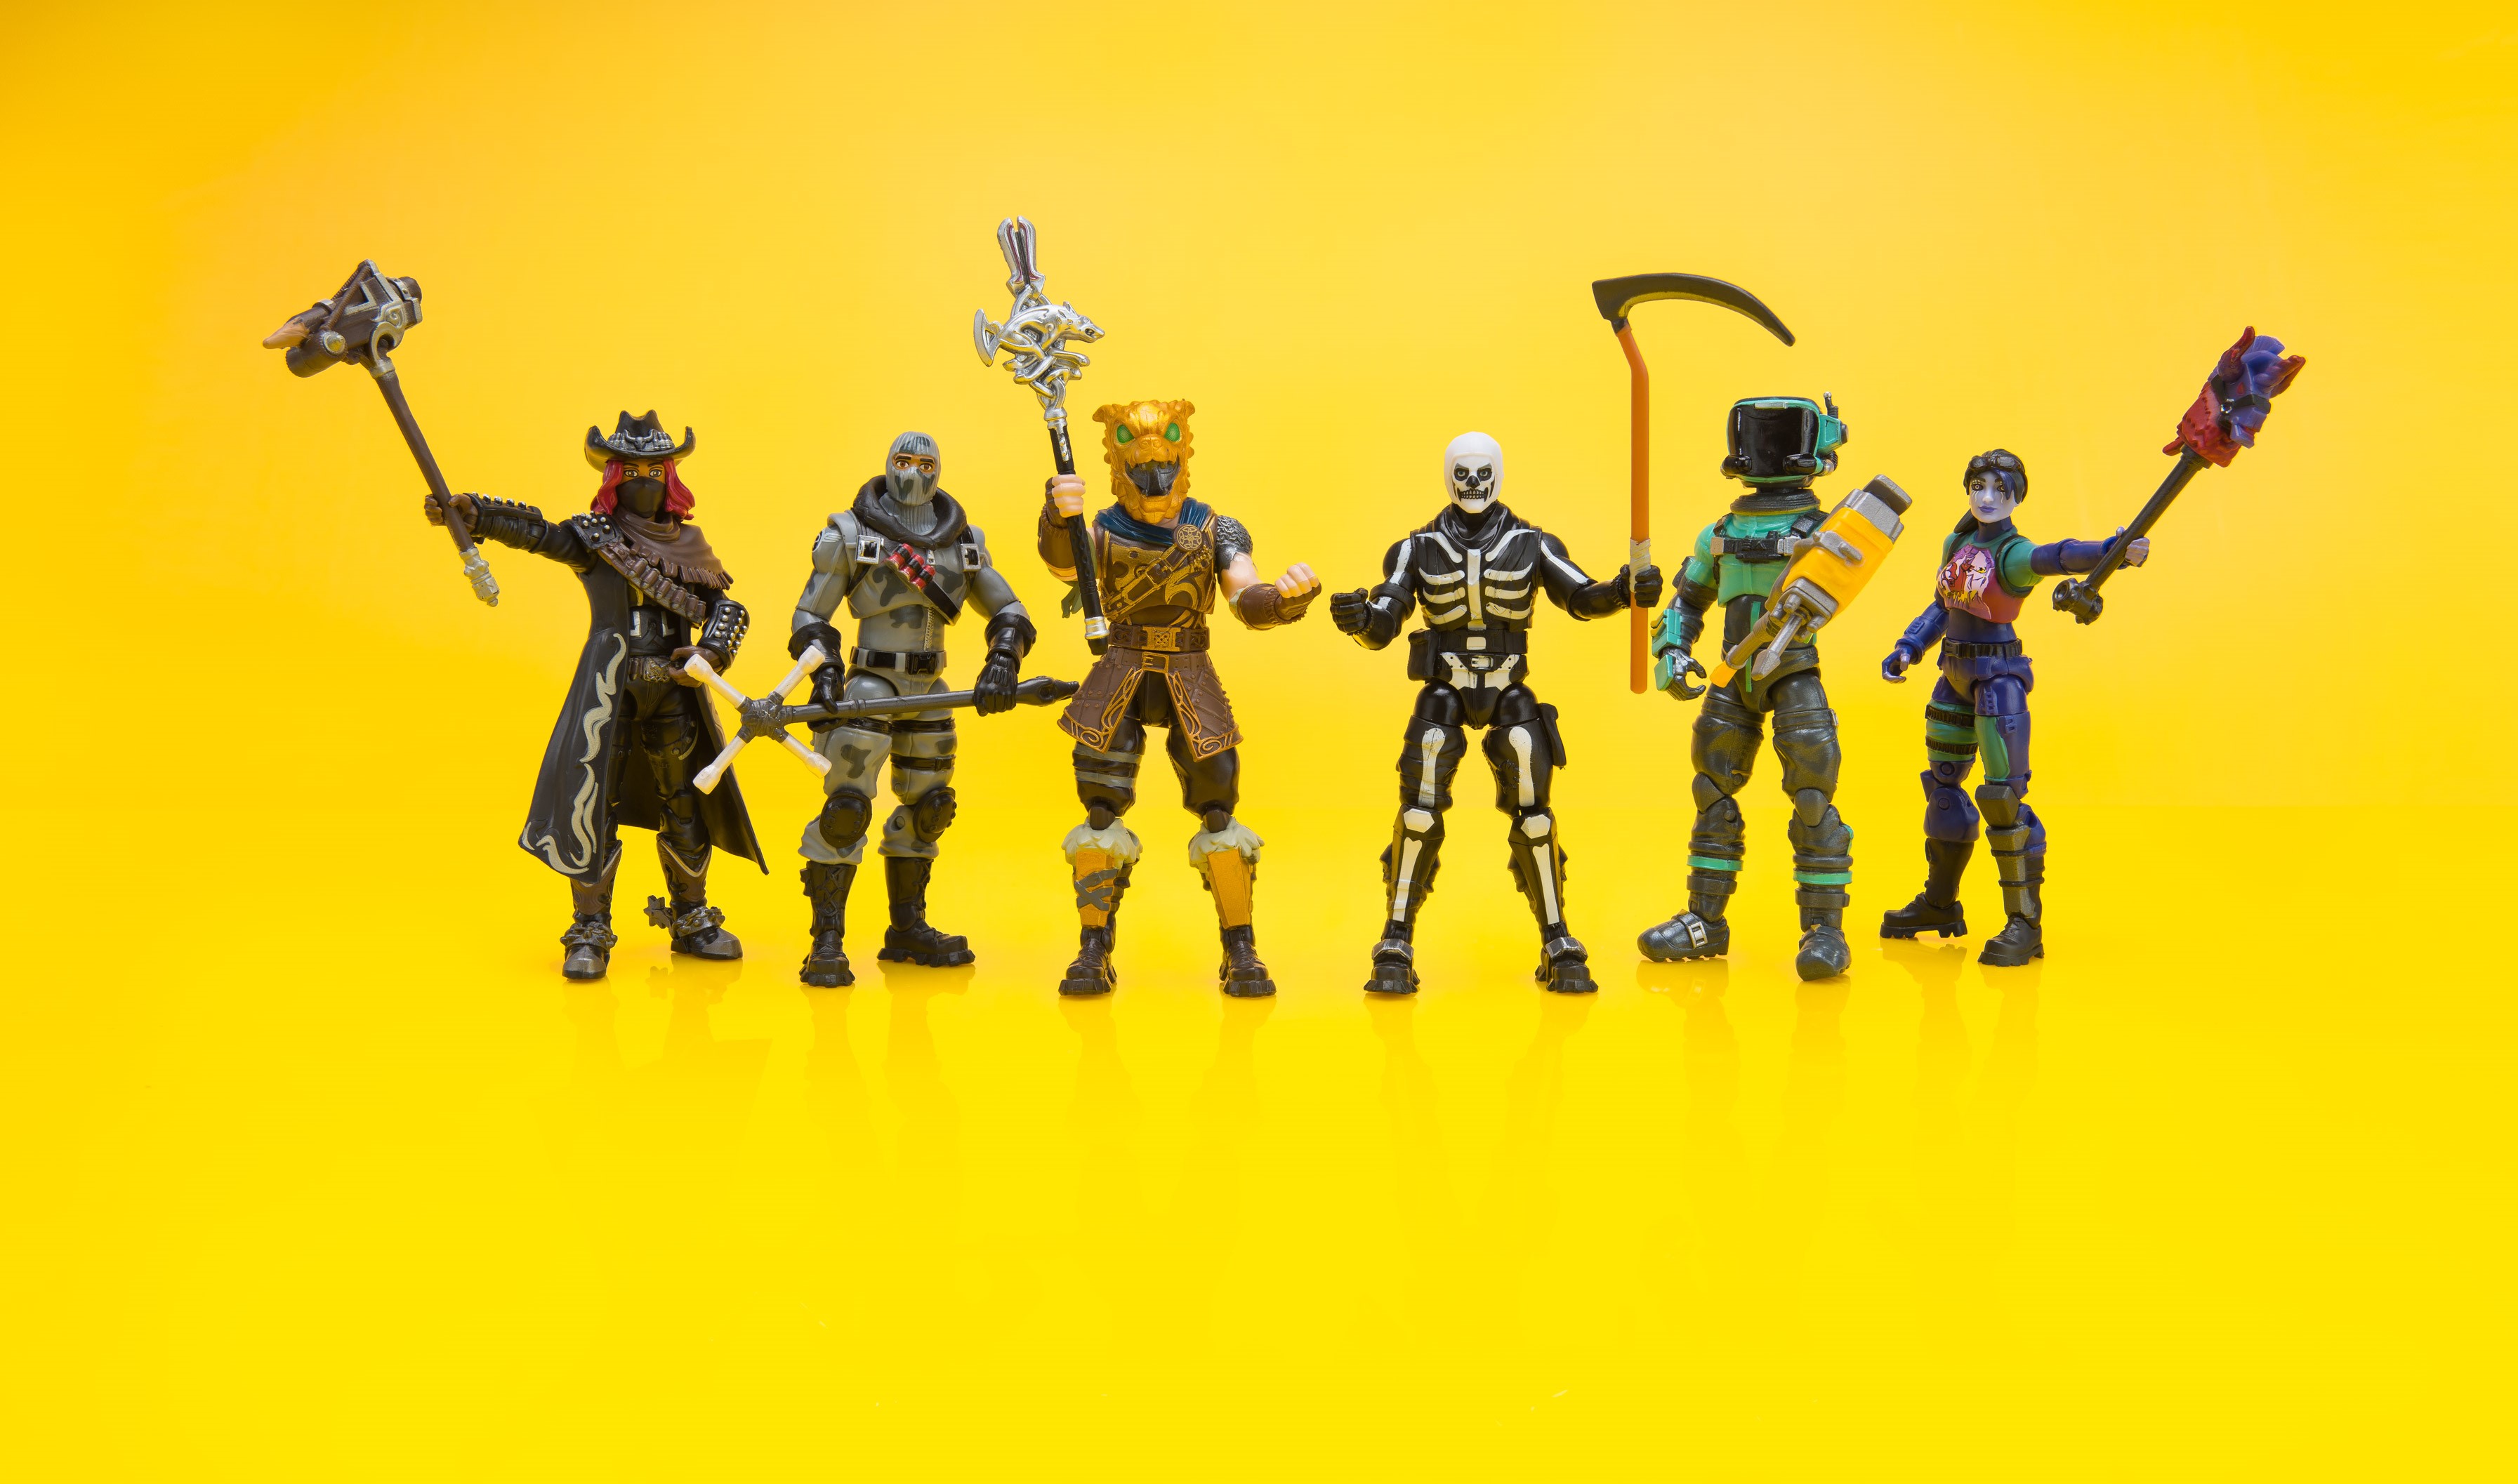 Fortnite Solo Mode Core Figure Pack, Battle Hound - image 4 of 5